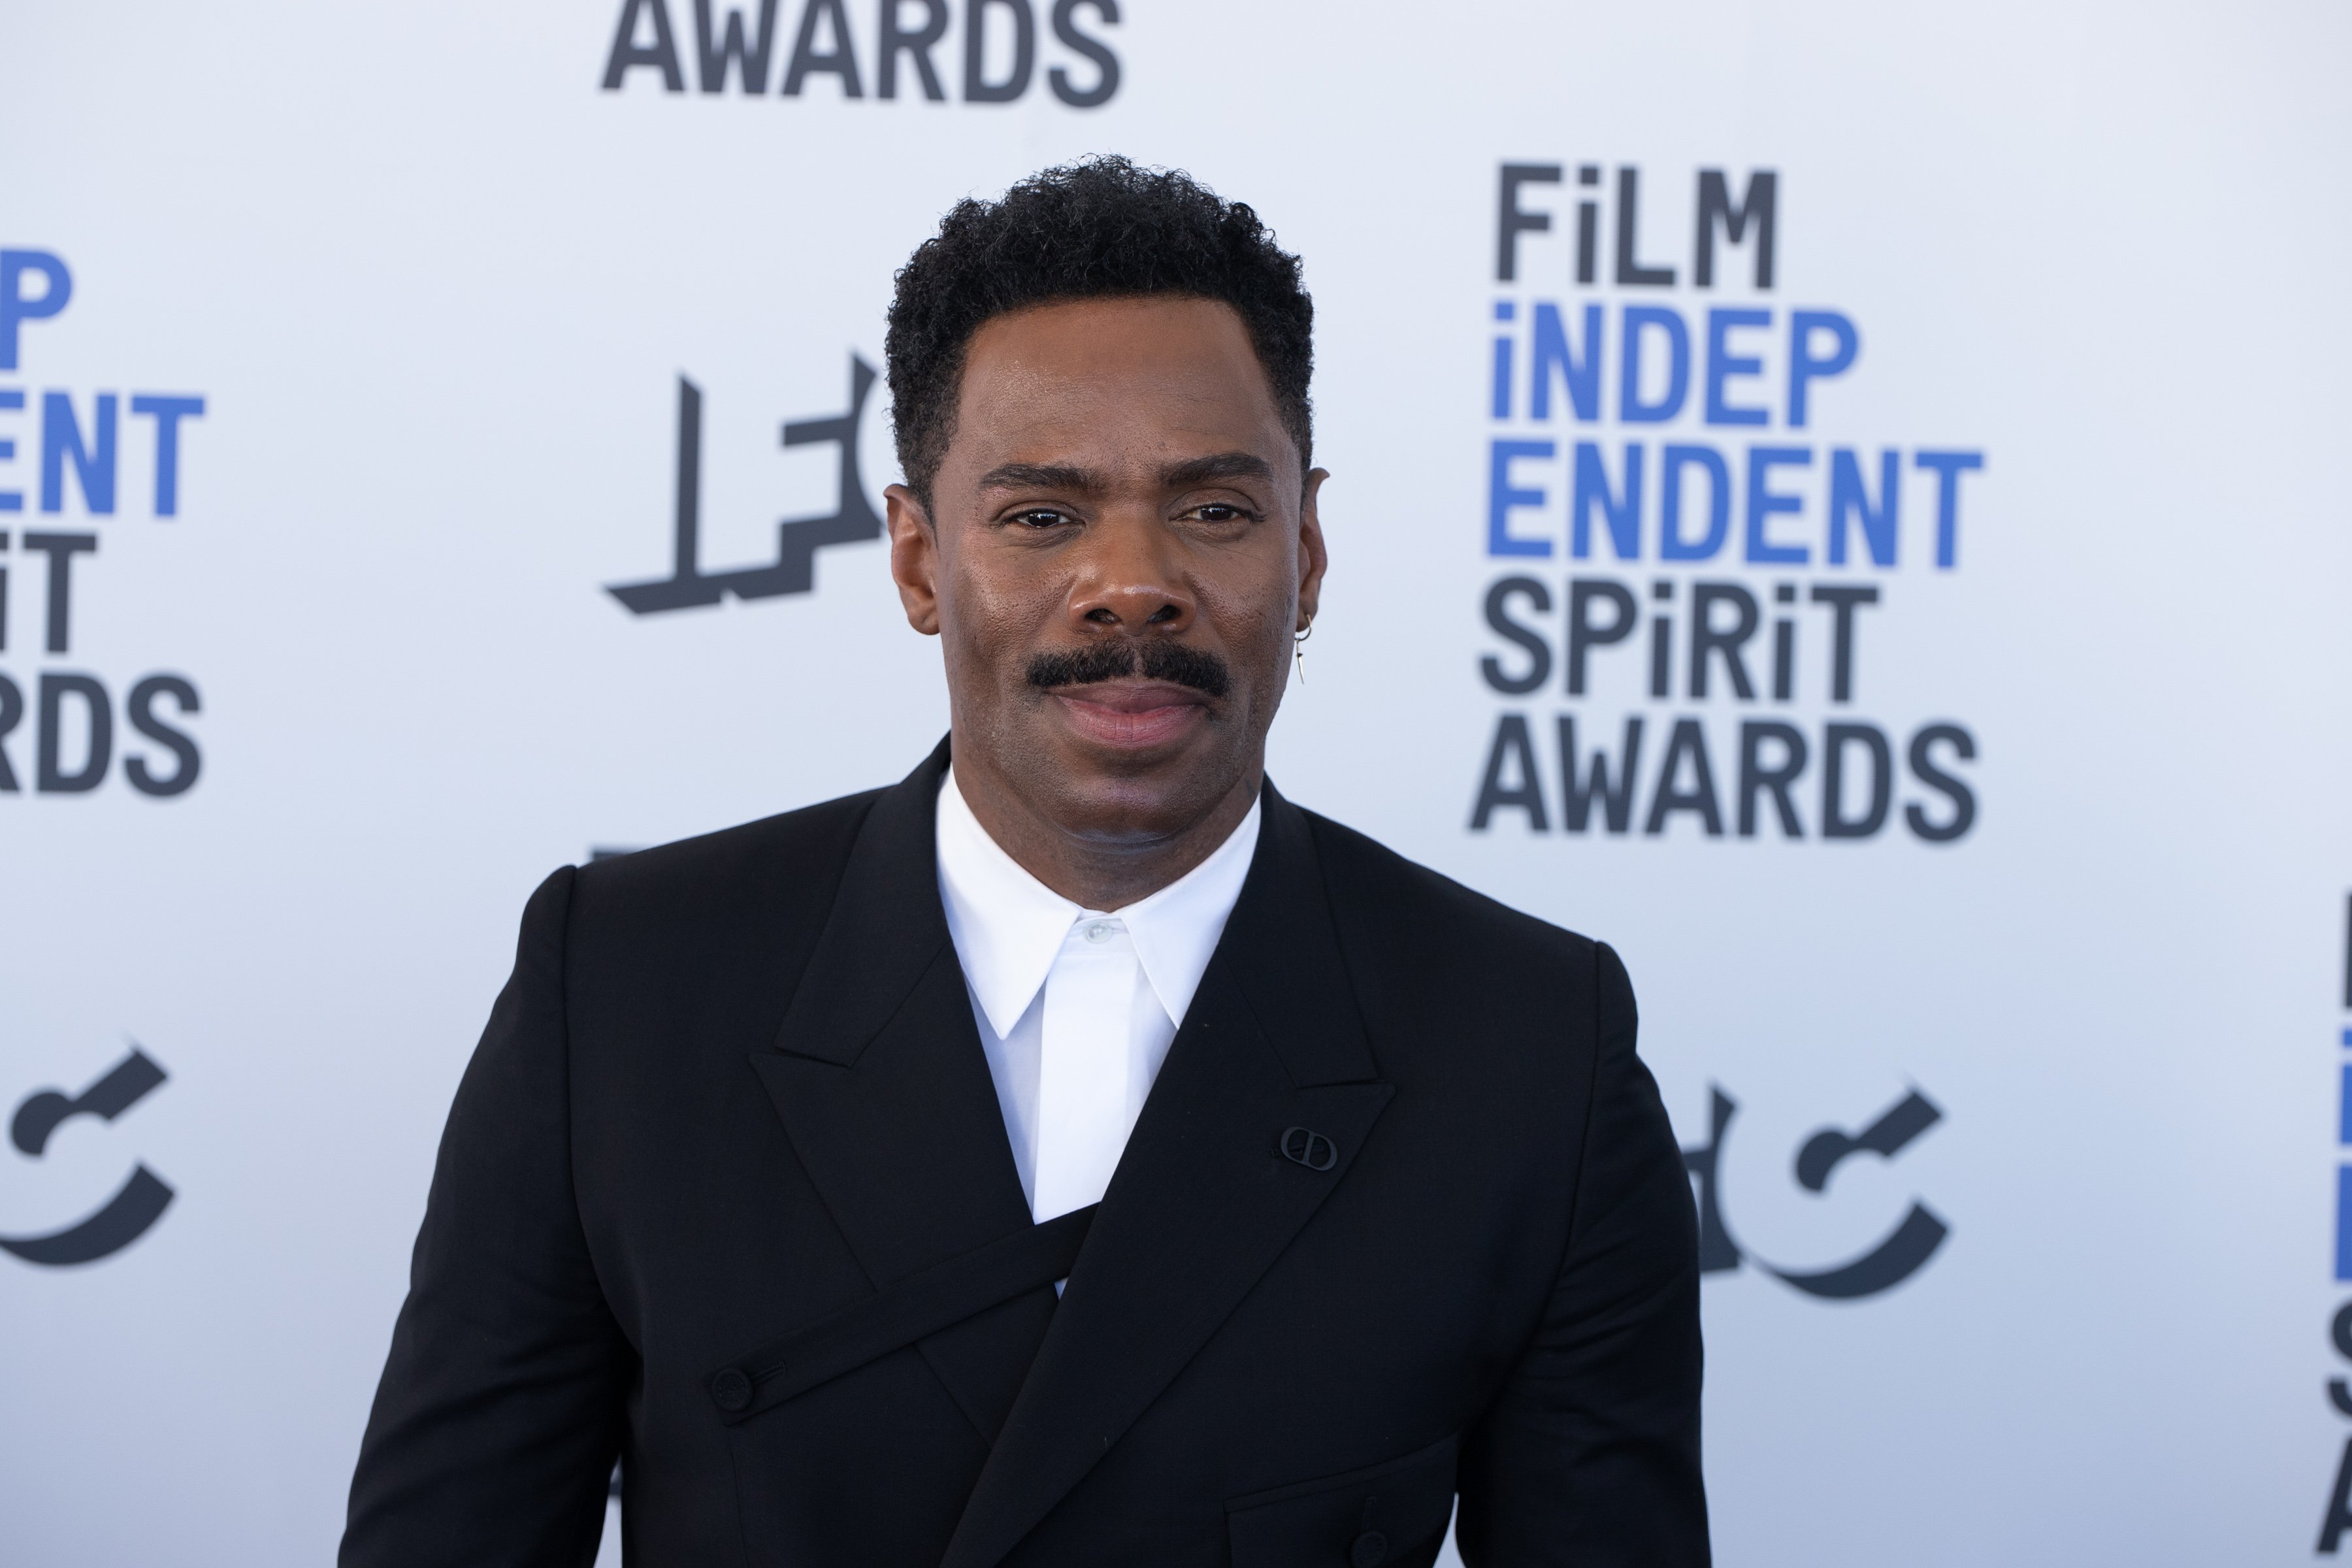 Colman Domingo from Zola attends the 2022 Film Independent Spirit Awards